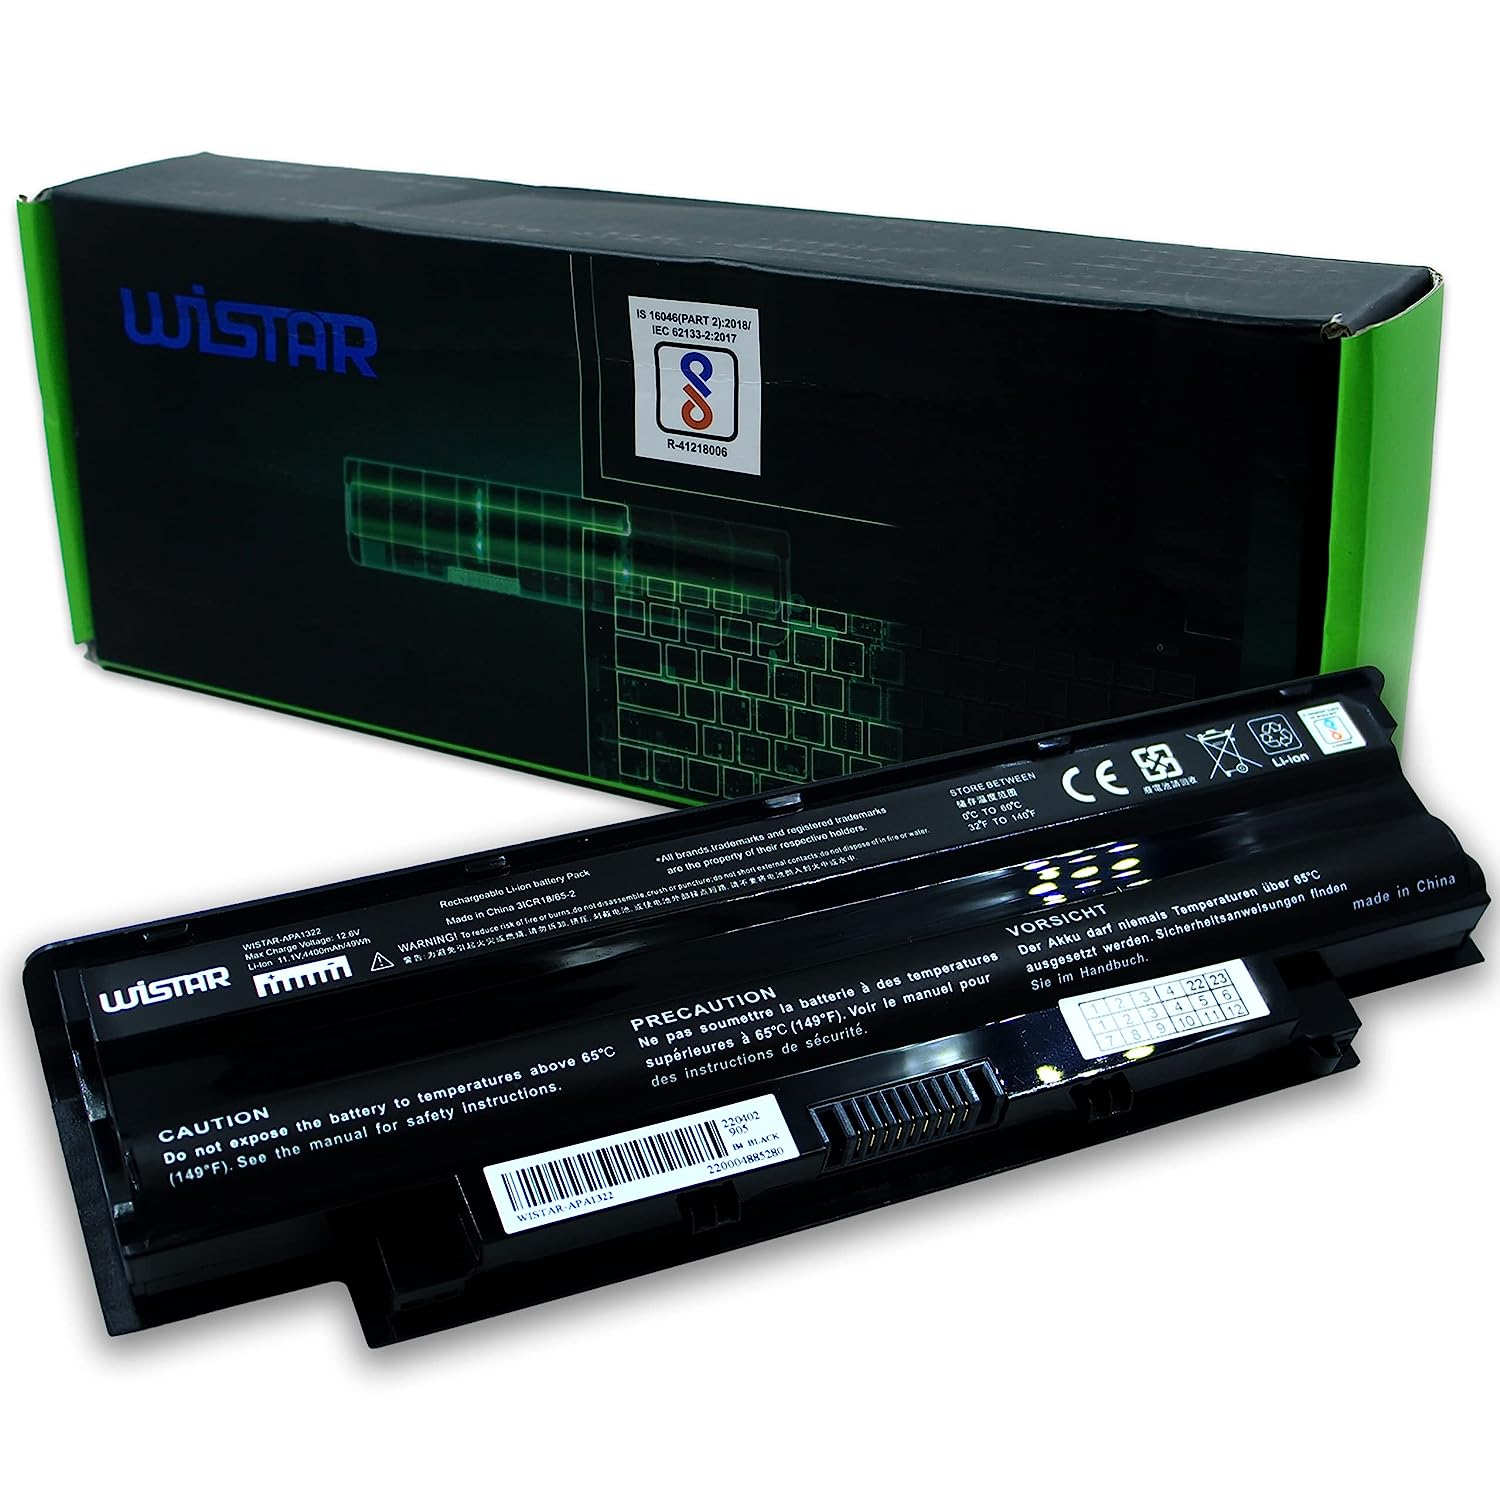 WISTAR 4400mAh Li-ion 6 Cell Laptop Battery for Dell Inspiron 13R 14R 15R 17R N3010 N4010 N5010 N5010D M4110 J1KND Vostro 1440 1550 3555 3750 3650 (Black)